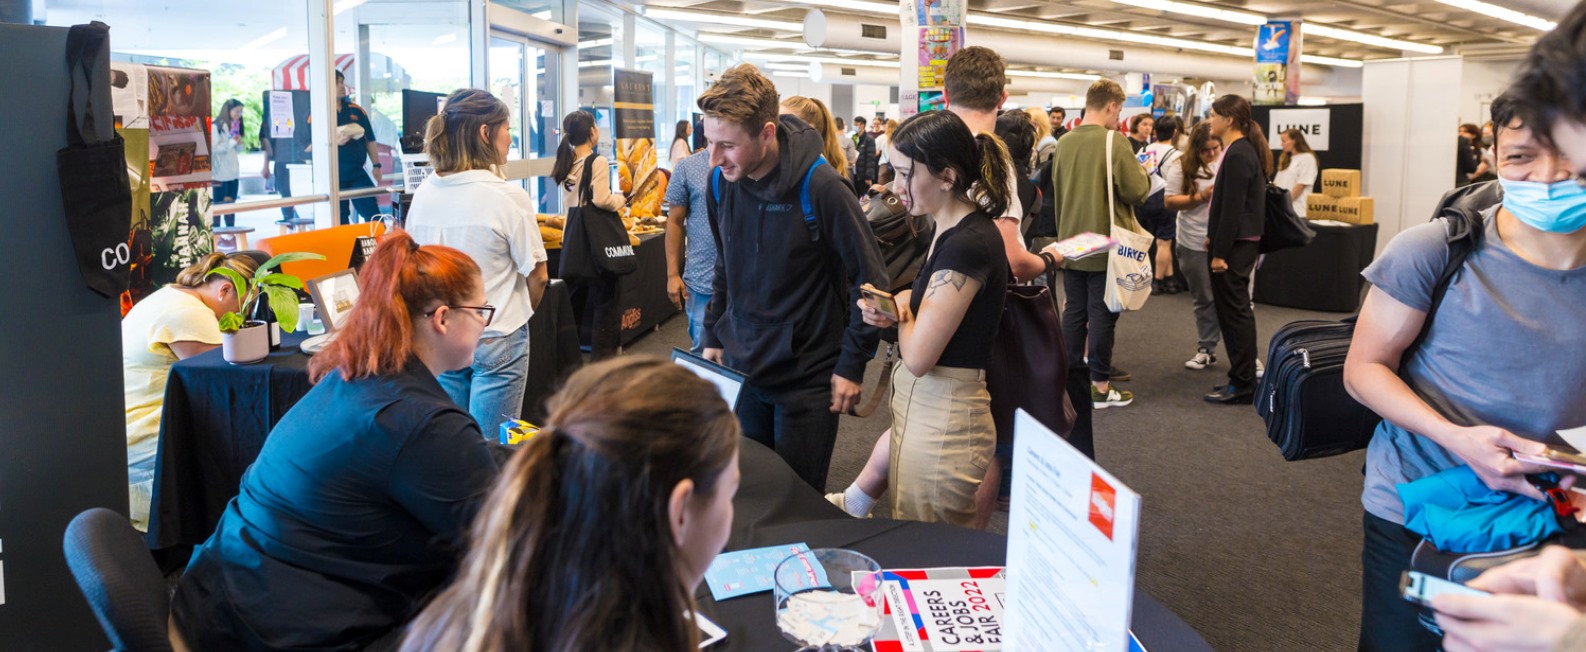 Students and employers at careers and jobs fair